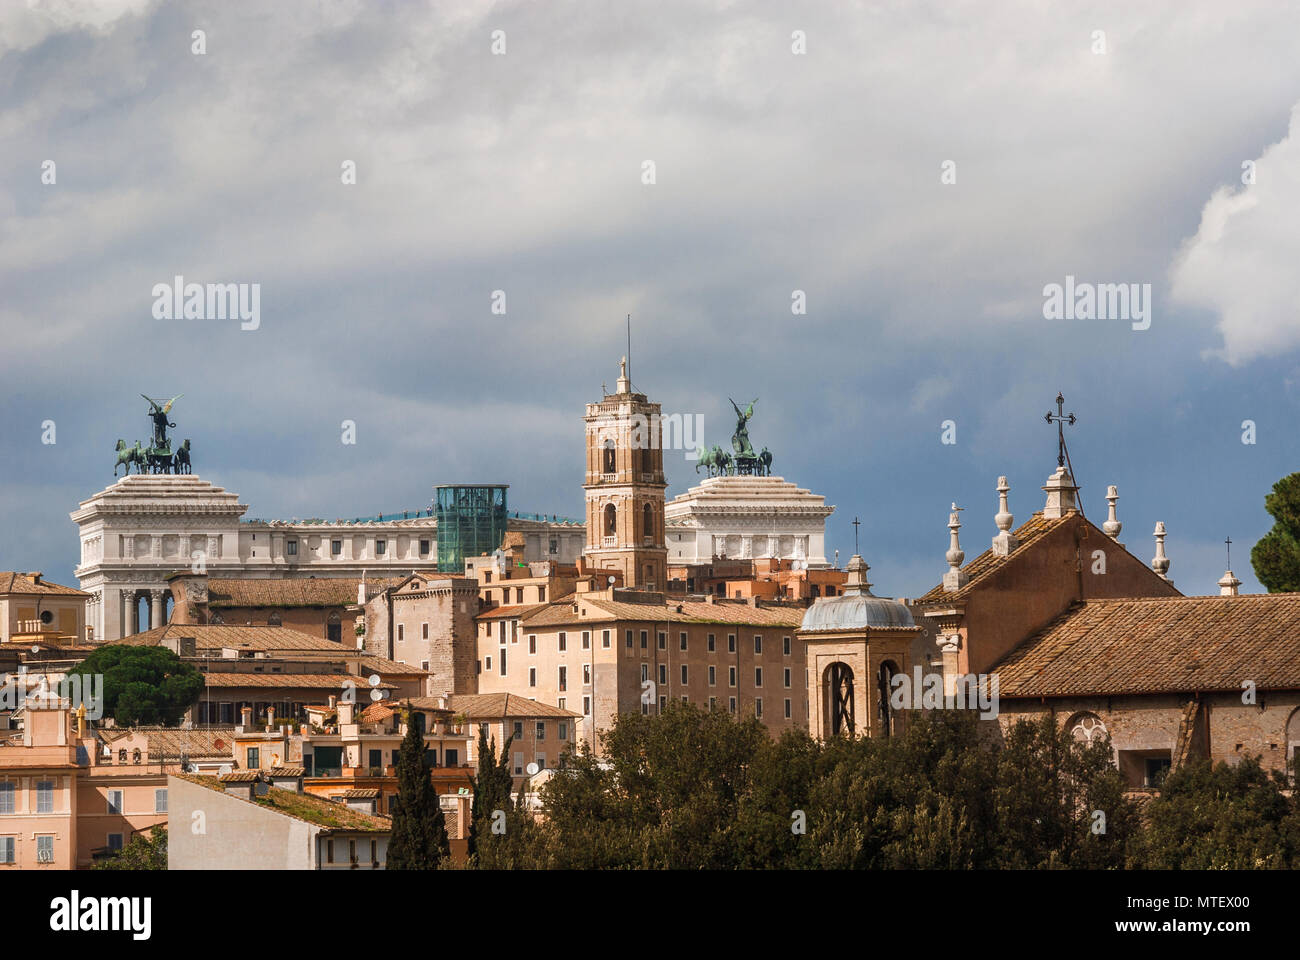 Capitoline Hill monuments with cloudy sky in Rome Stock Photo